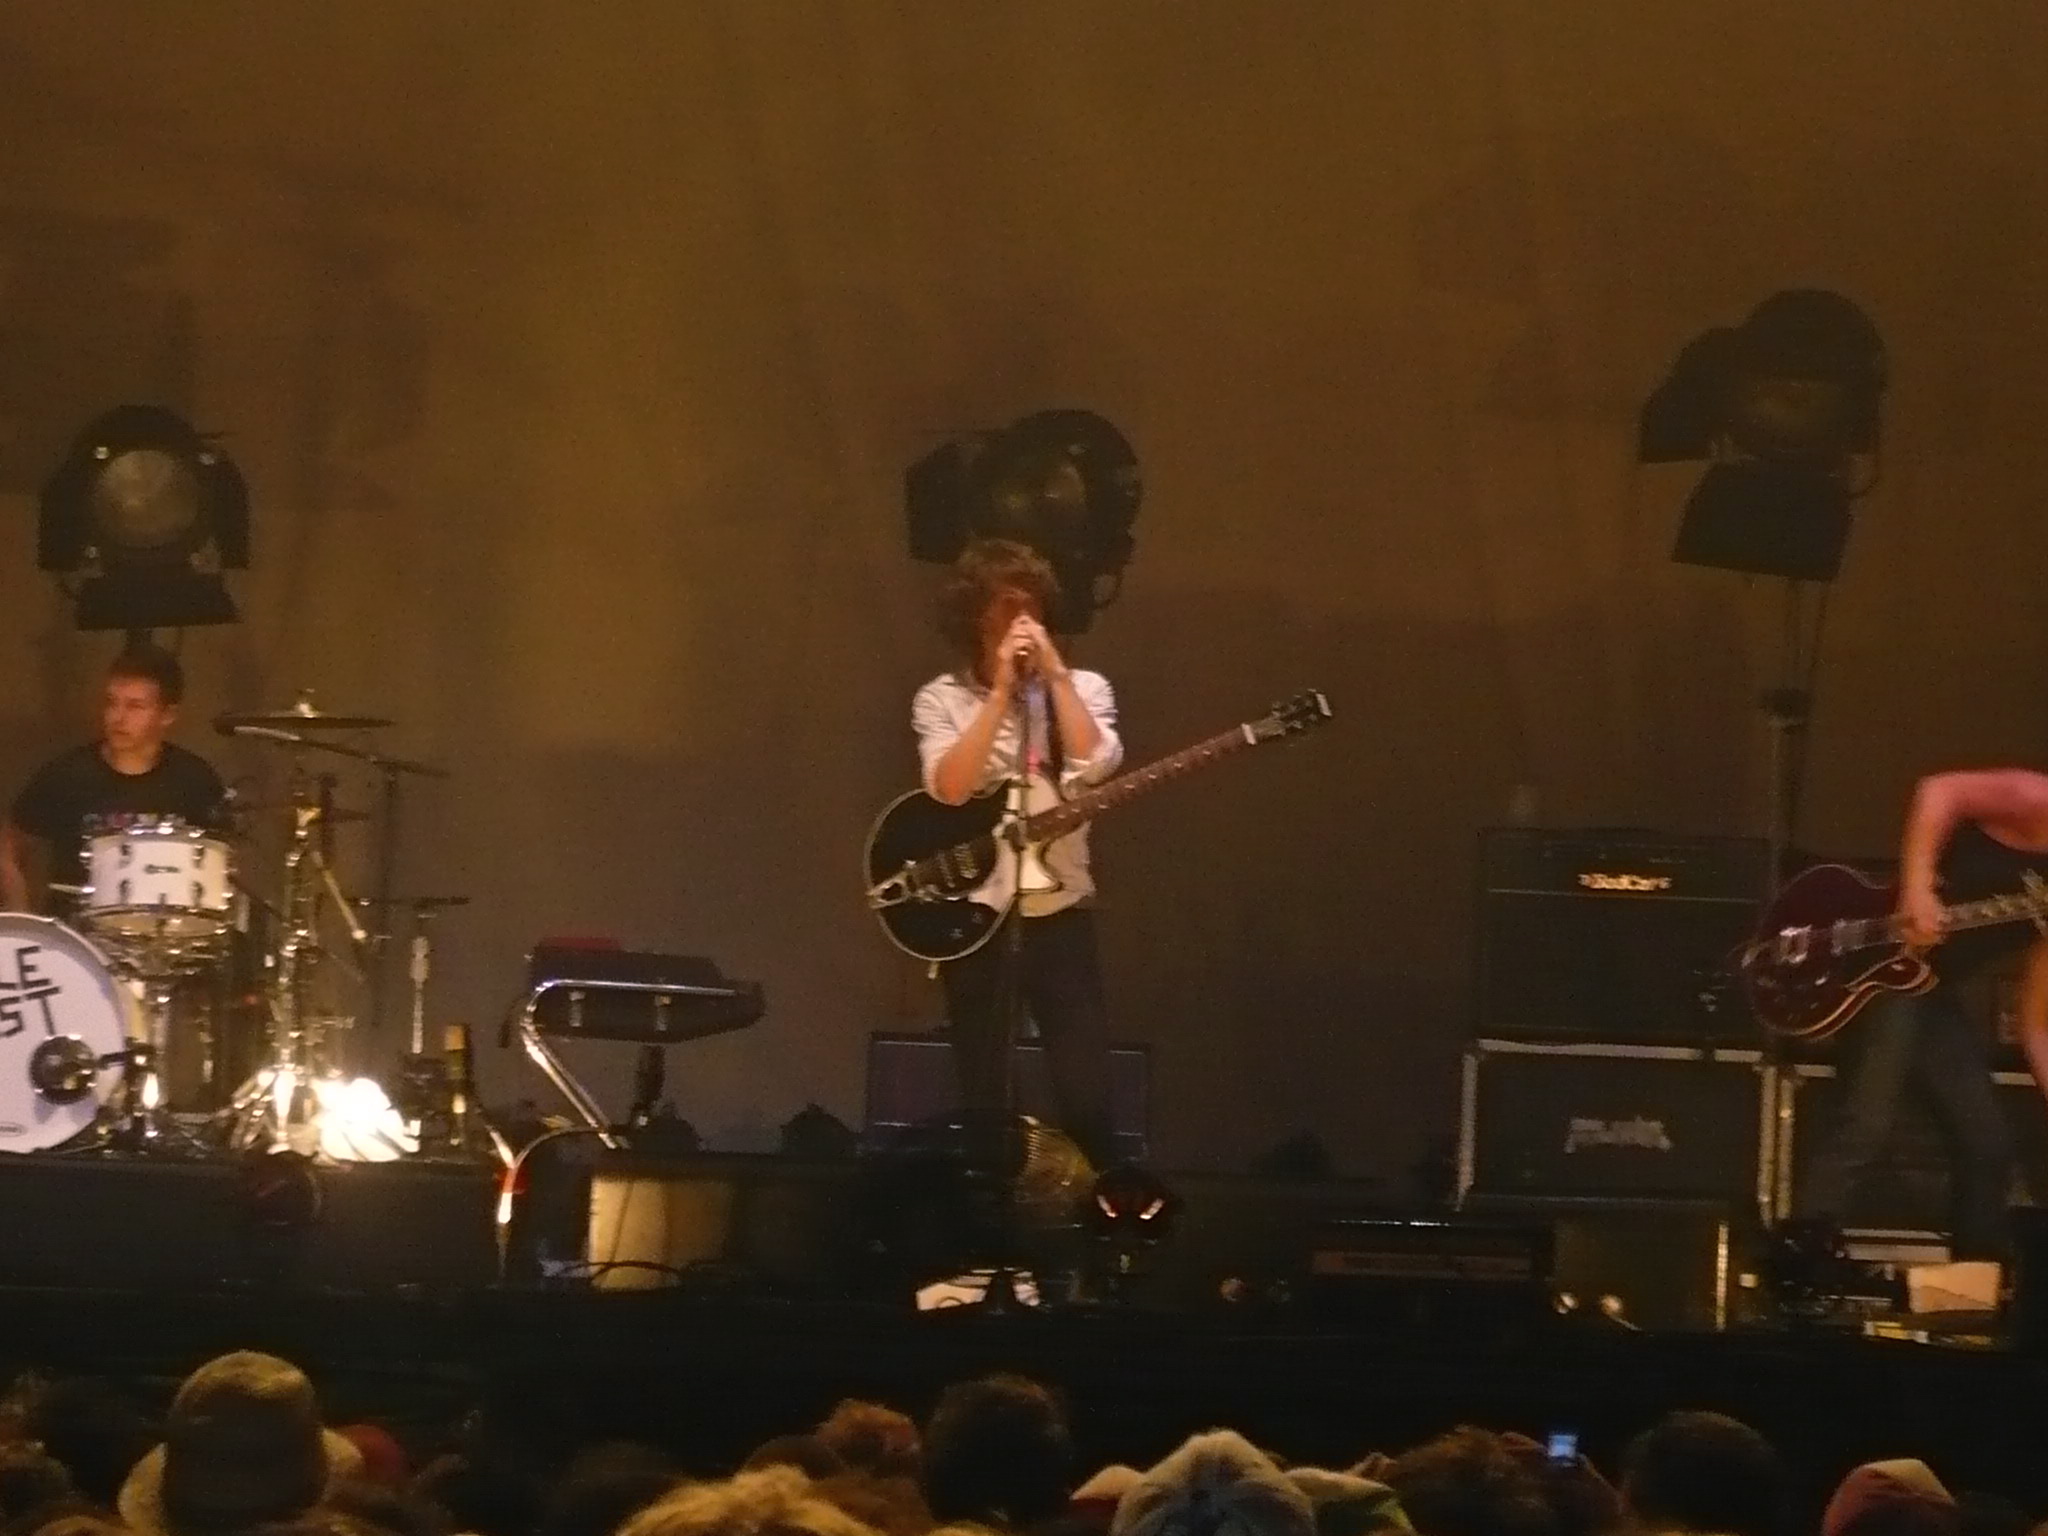 three men are performing on stage with guitars